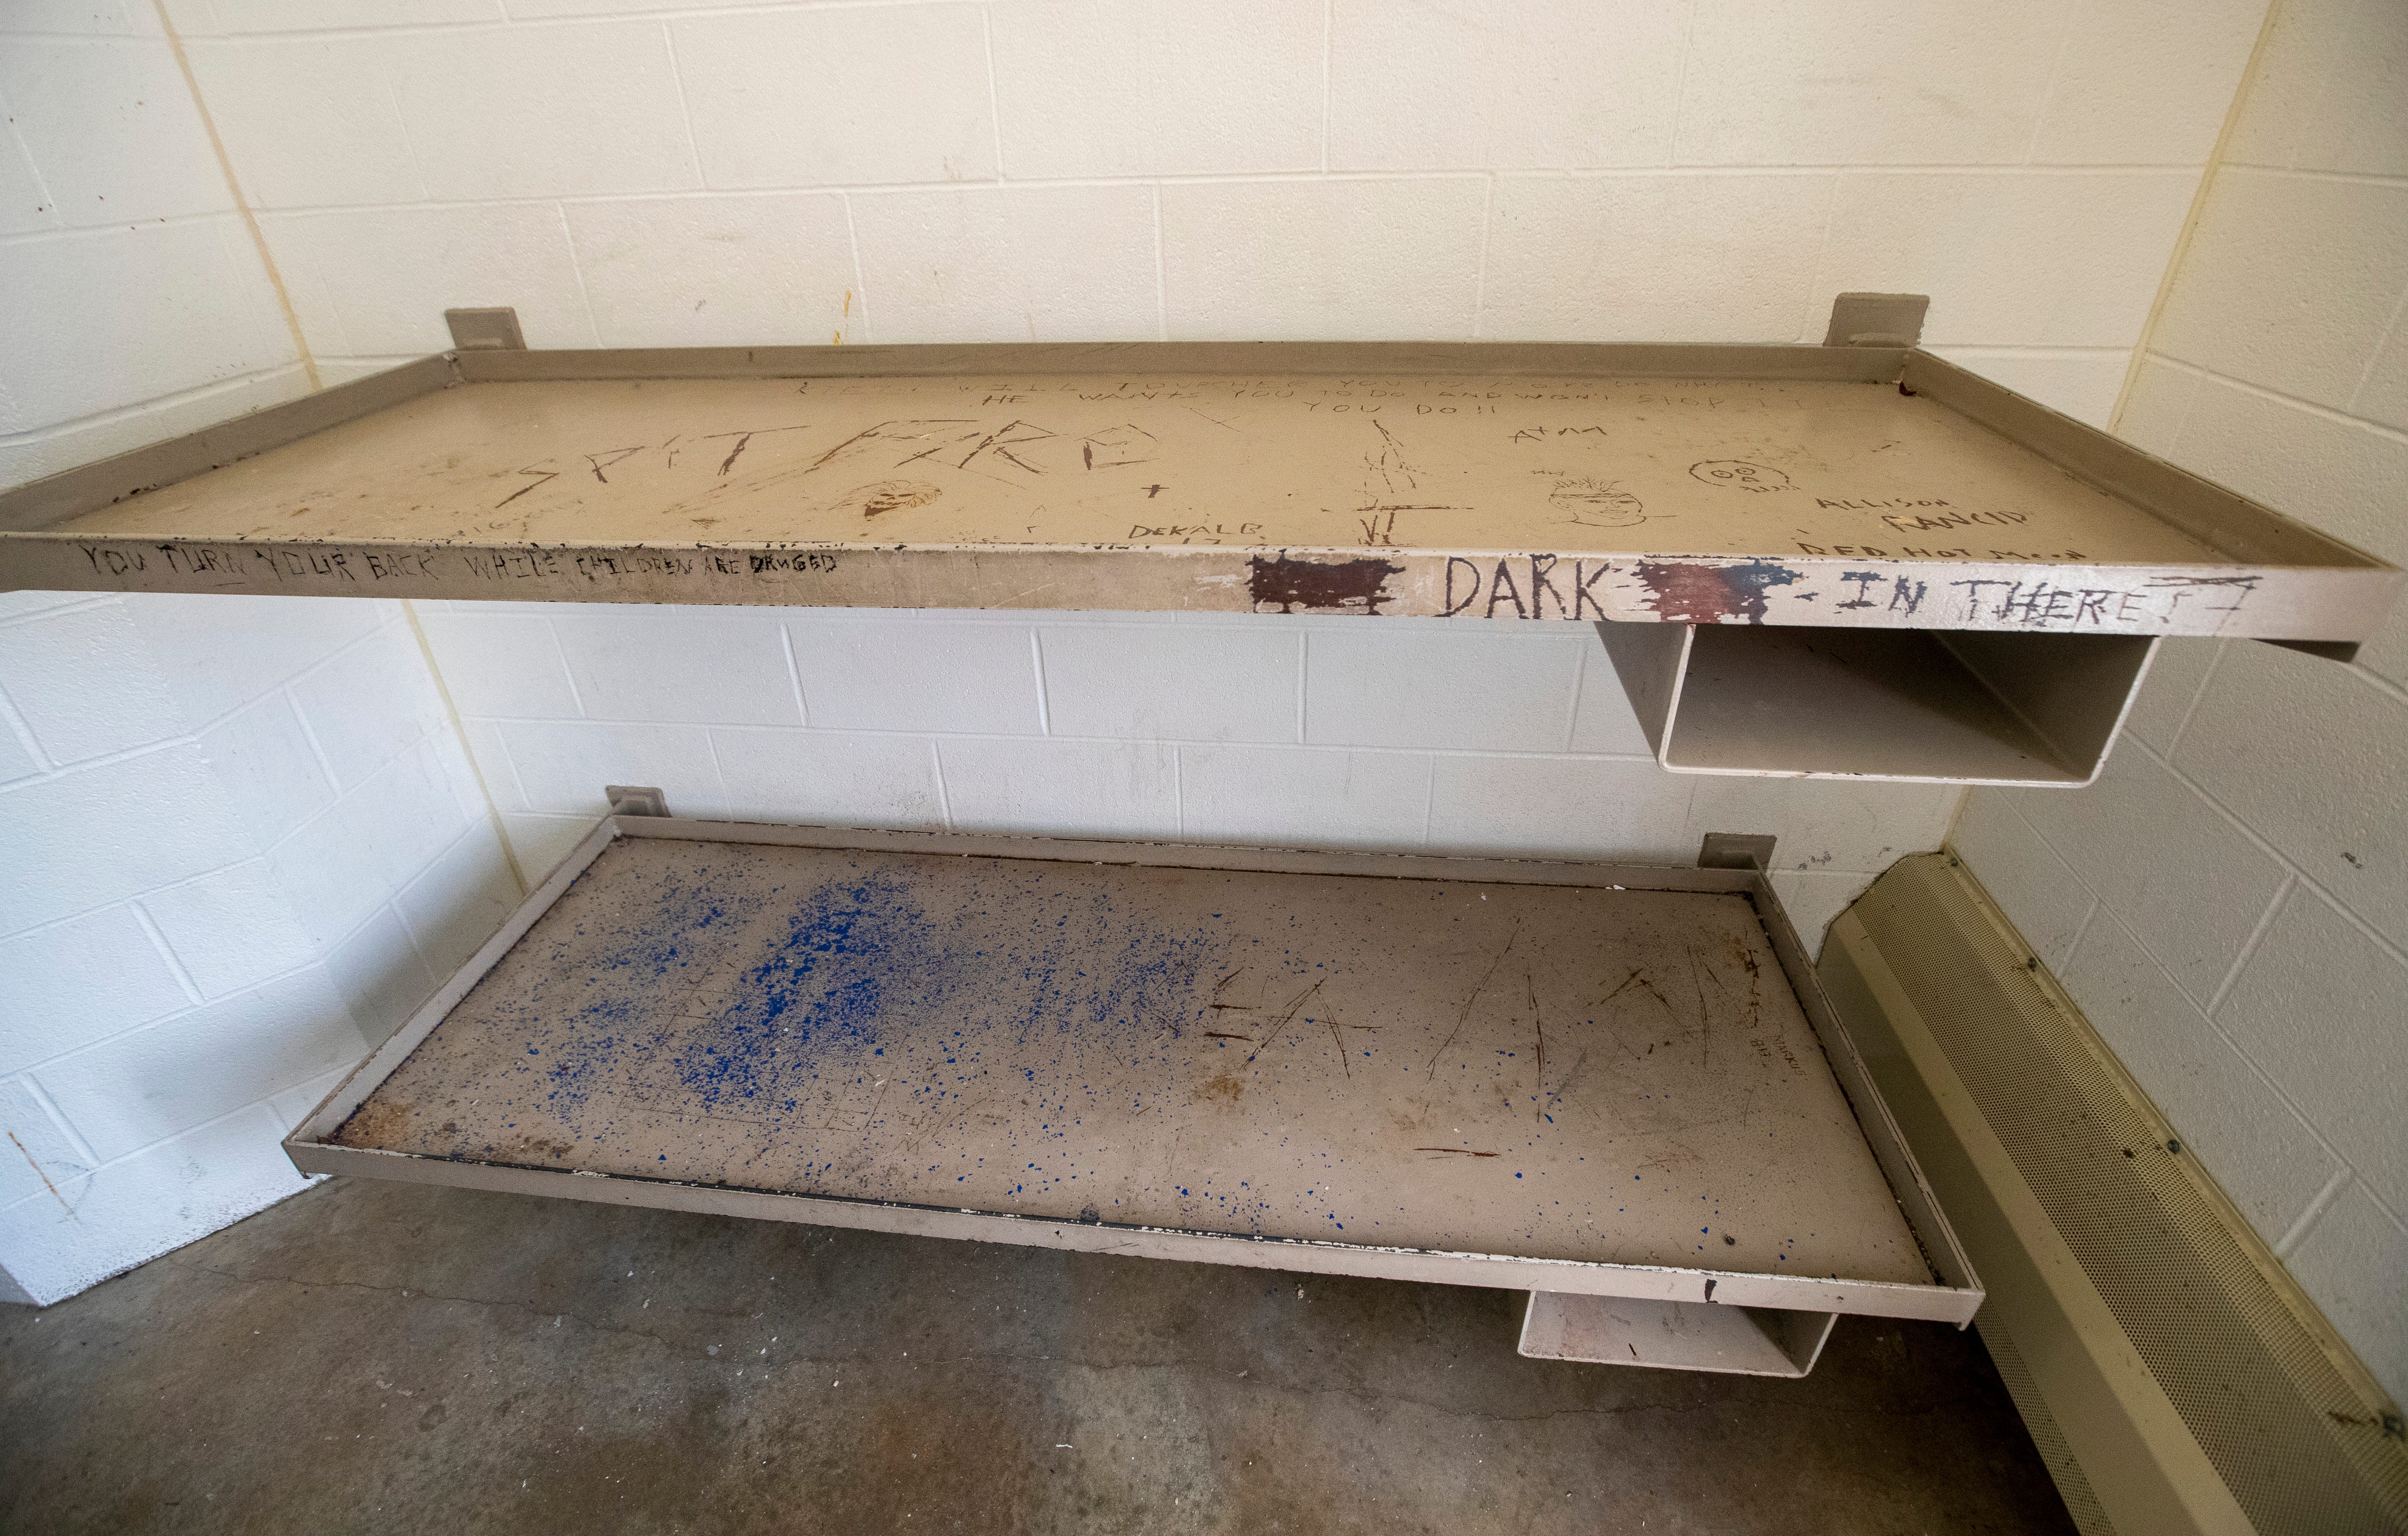 Metal bunks on Thursday, June 24, 2021, at the Allen County Jail in downtown Ft. Wayne, Ind. A thin pad is typically given to detainees, but on occasion they run out forcing people to sleep on these metal beds or on portable plastic bunks that sit on the ground.